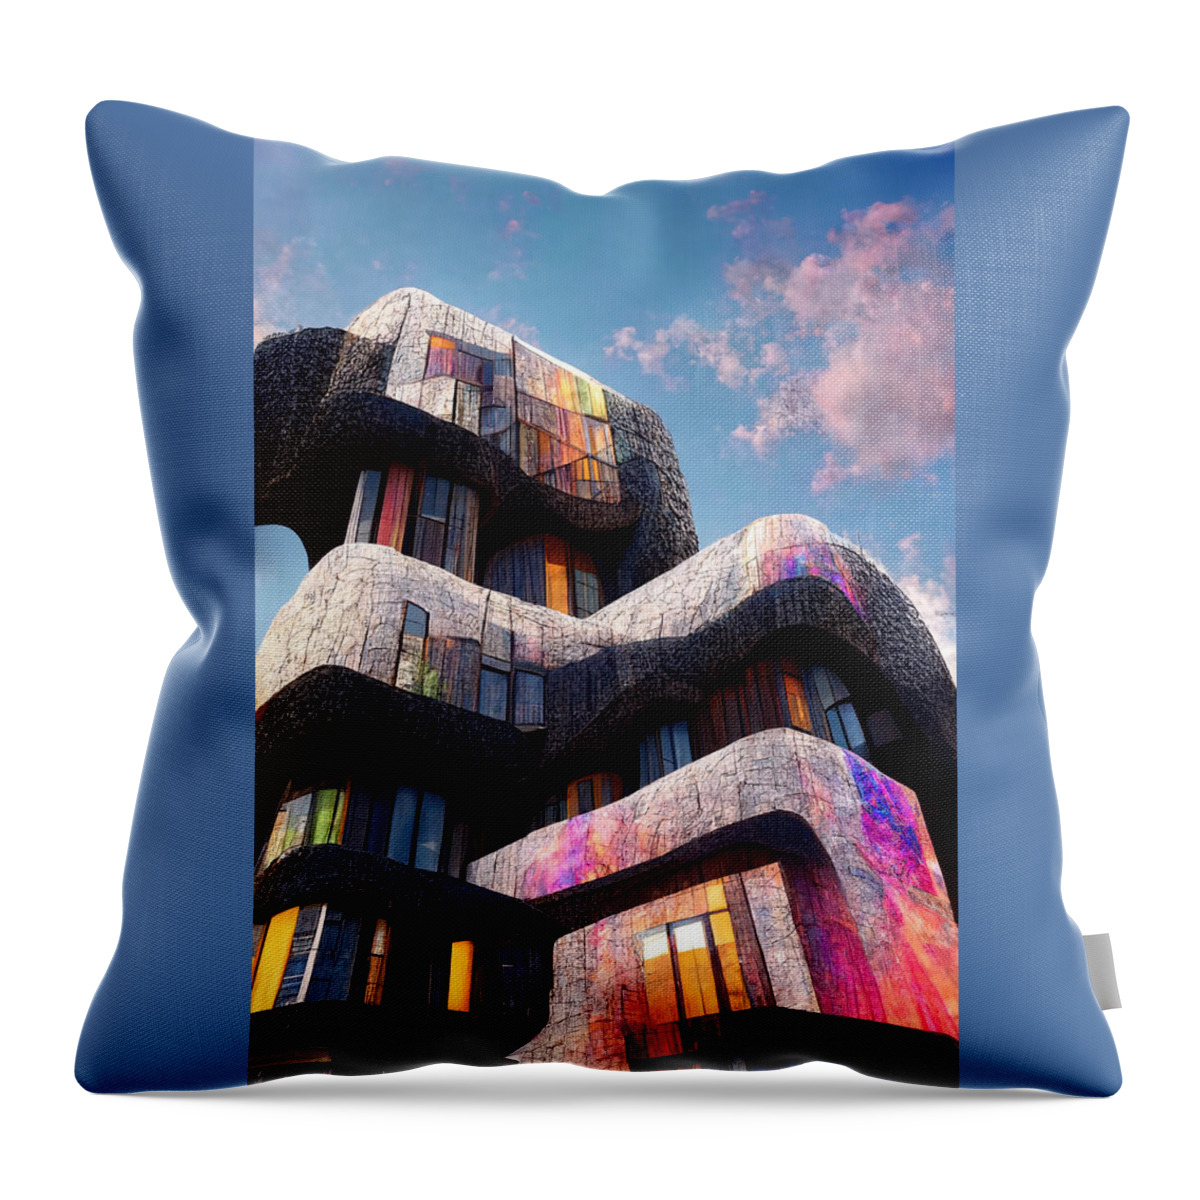 Beautiful Throw Pillow featuring the painting Bilaterally Symetric Building Facade Front Facing Pa Dc2bc15f 2abd 4421 8cba Fbdf641161e1 by MotionAge Designs